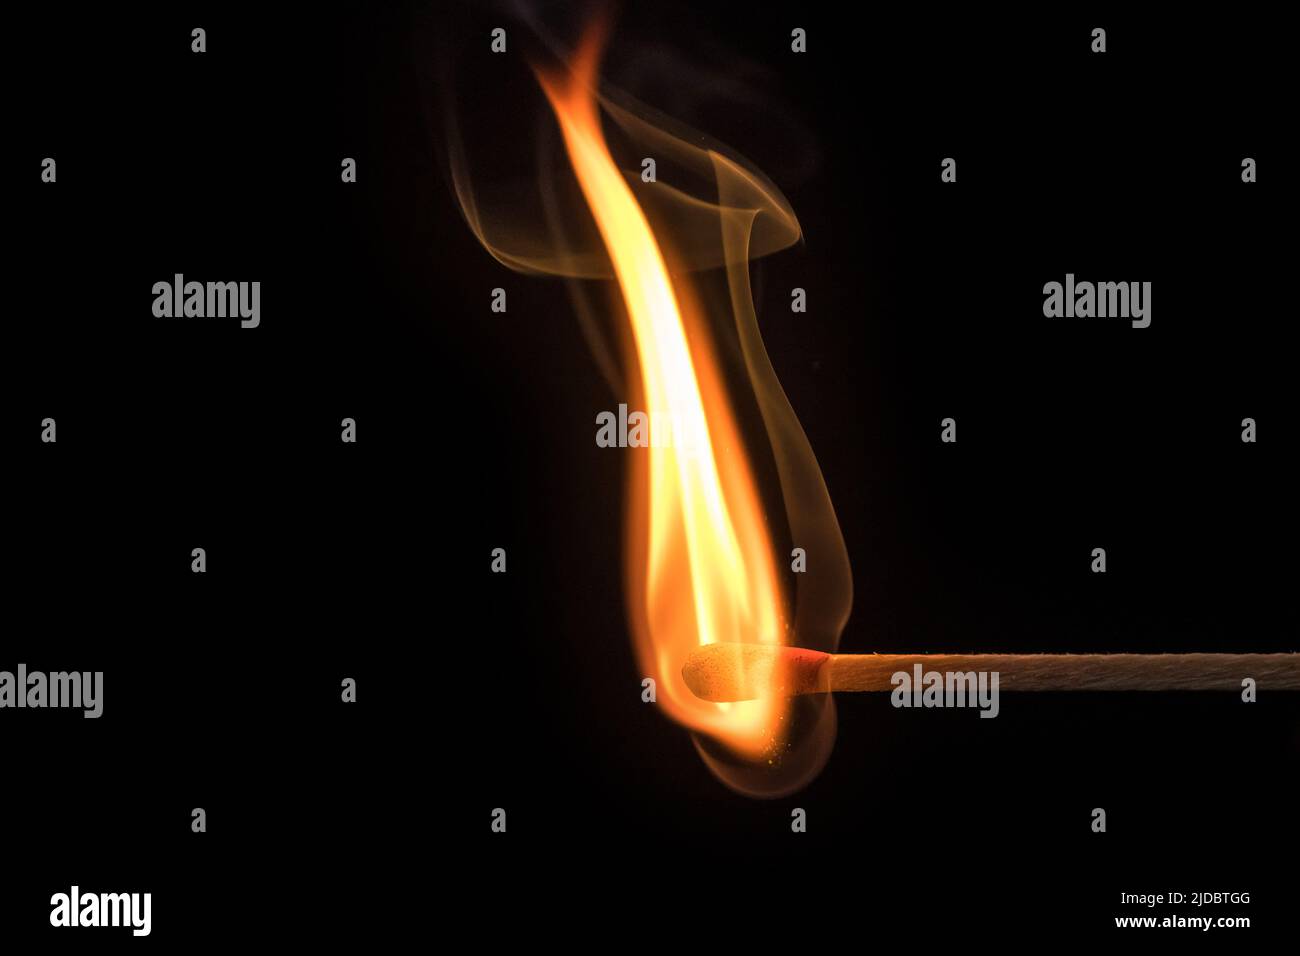 Artfully curved flame and smoke of a lit match in front of a black background Stock Photo